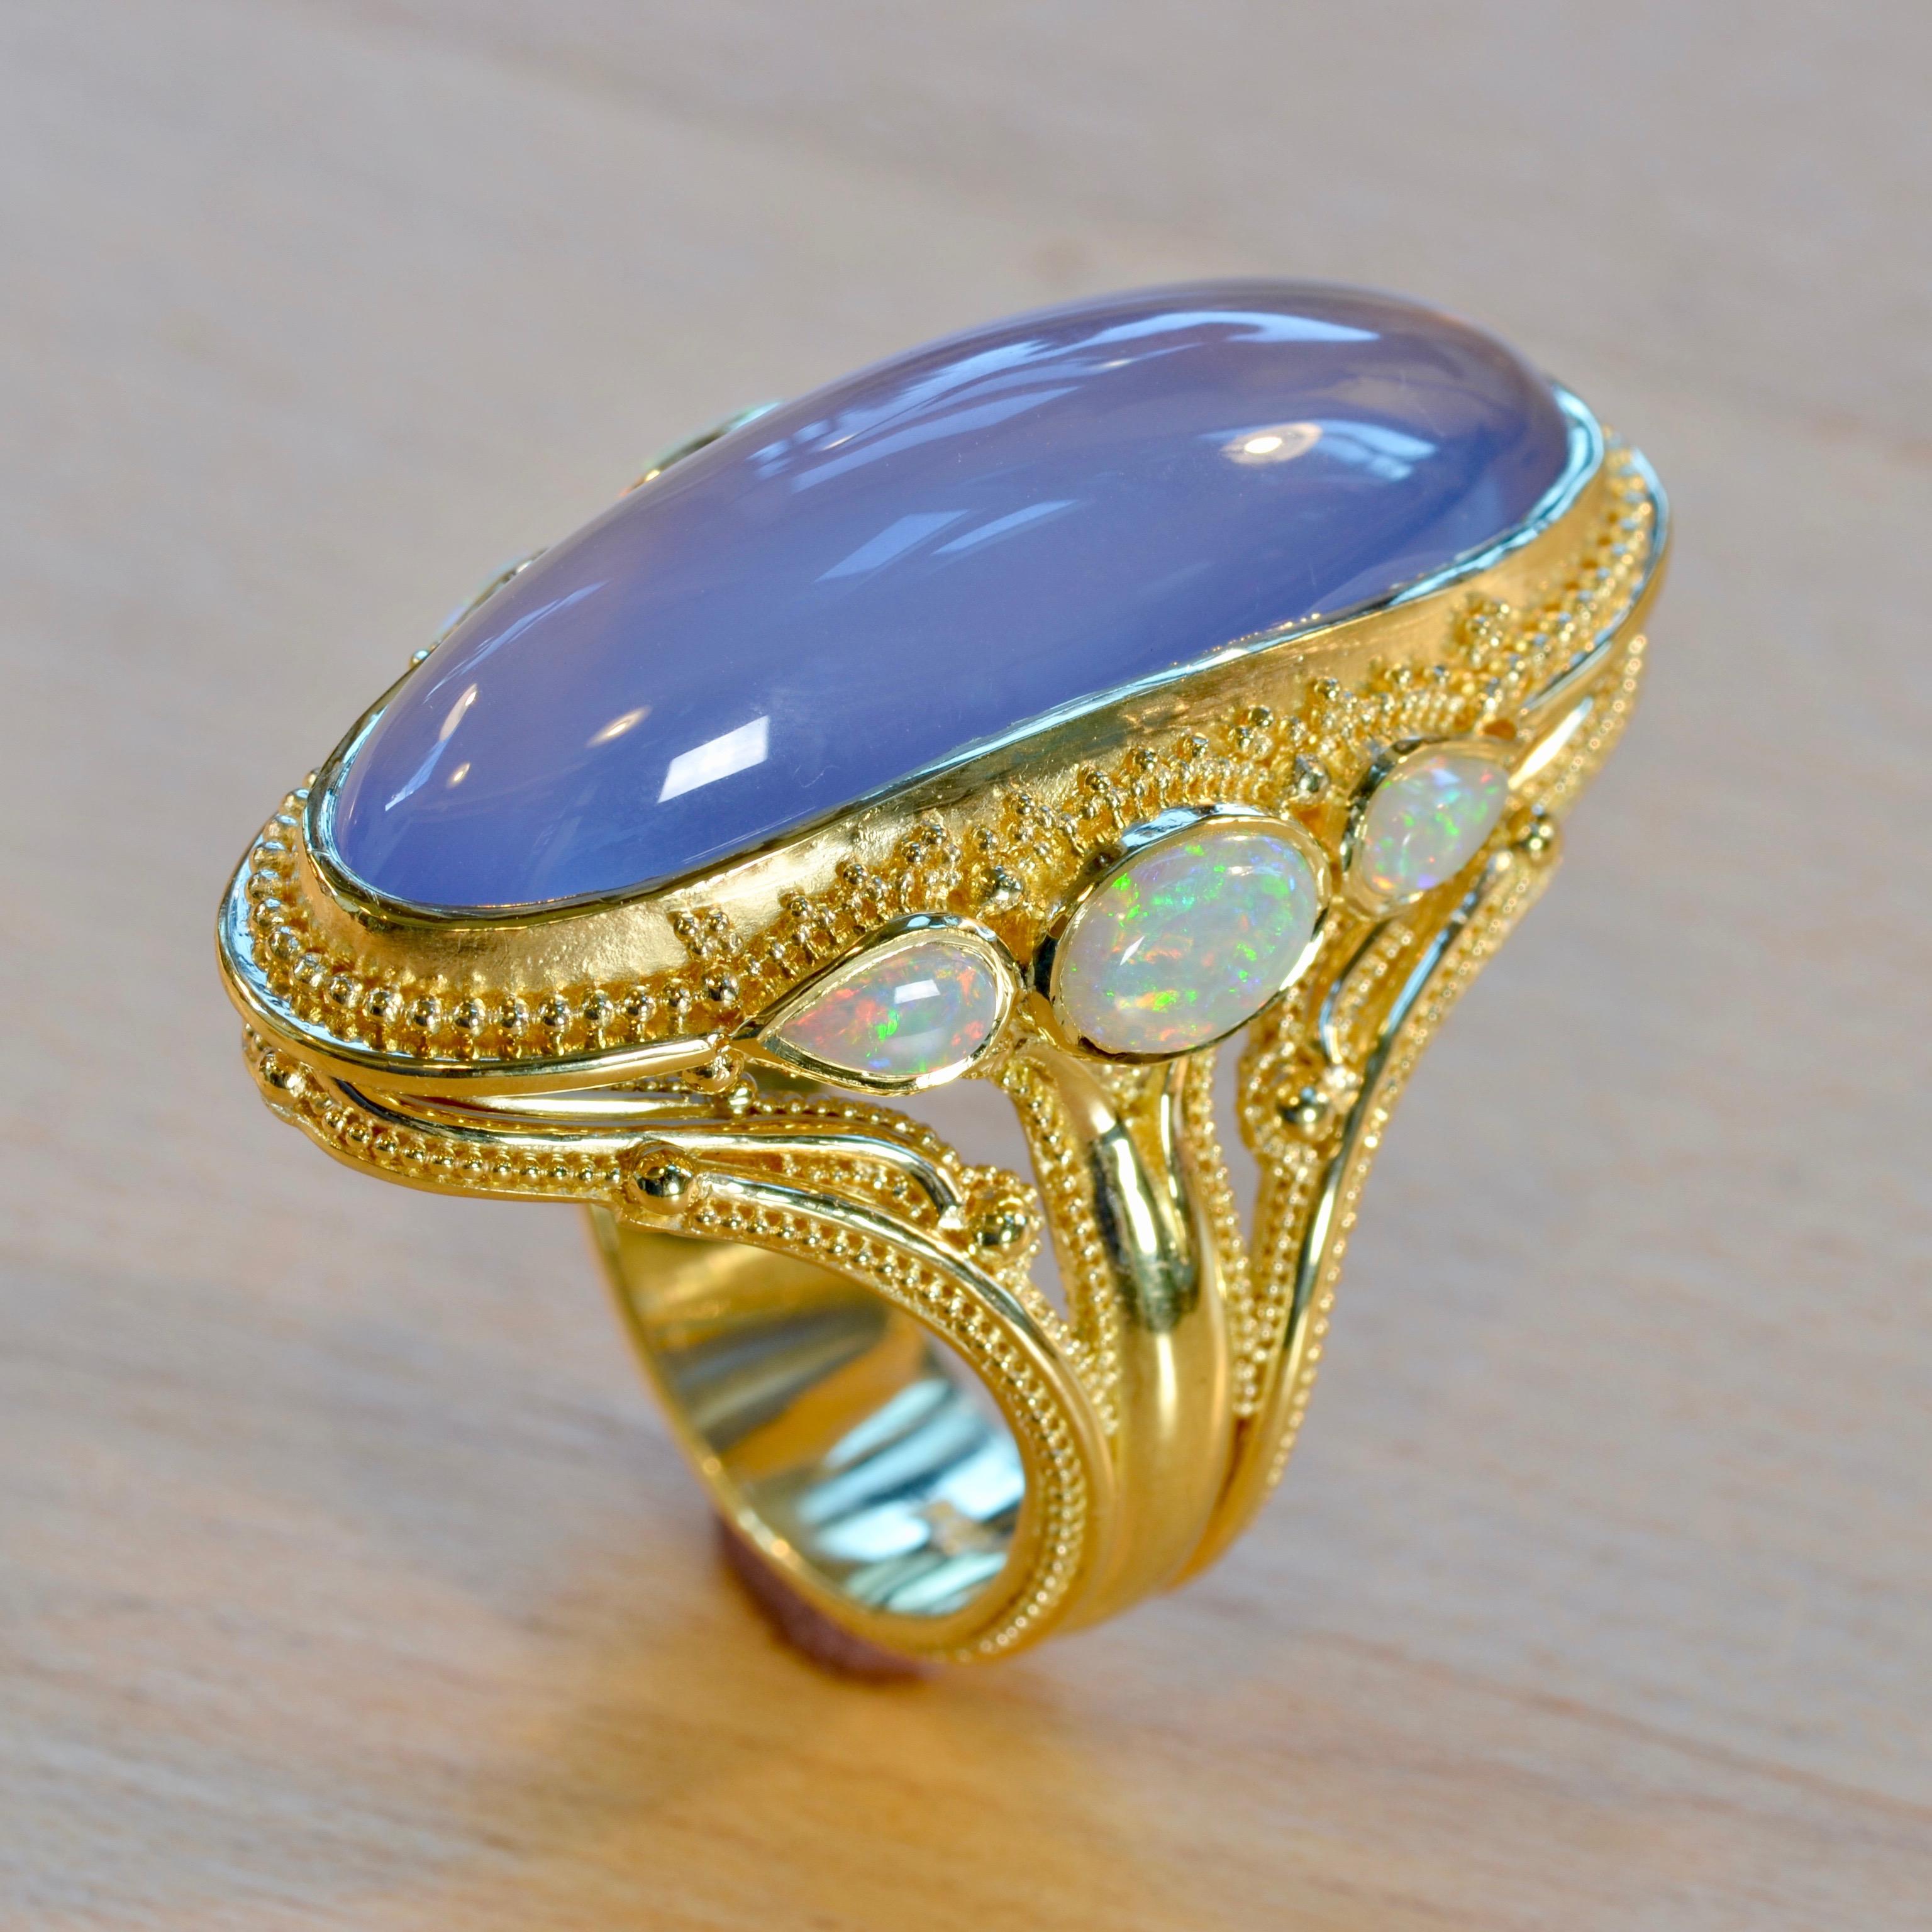 Kent Raible 18 Karat Gold Chalcedony and Opal Cocktail Ring with Granulation 3